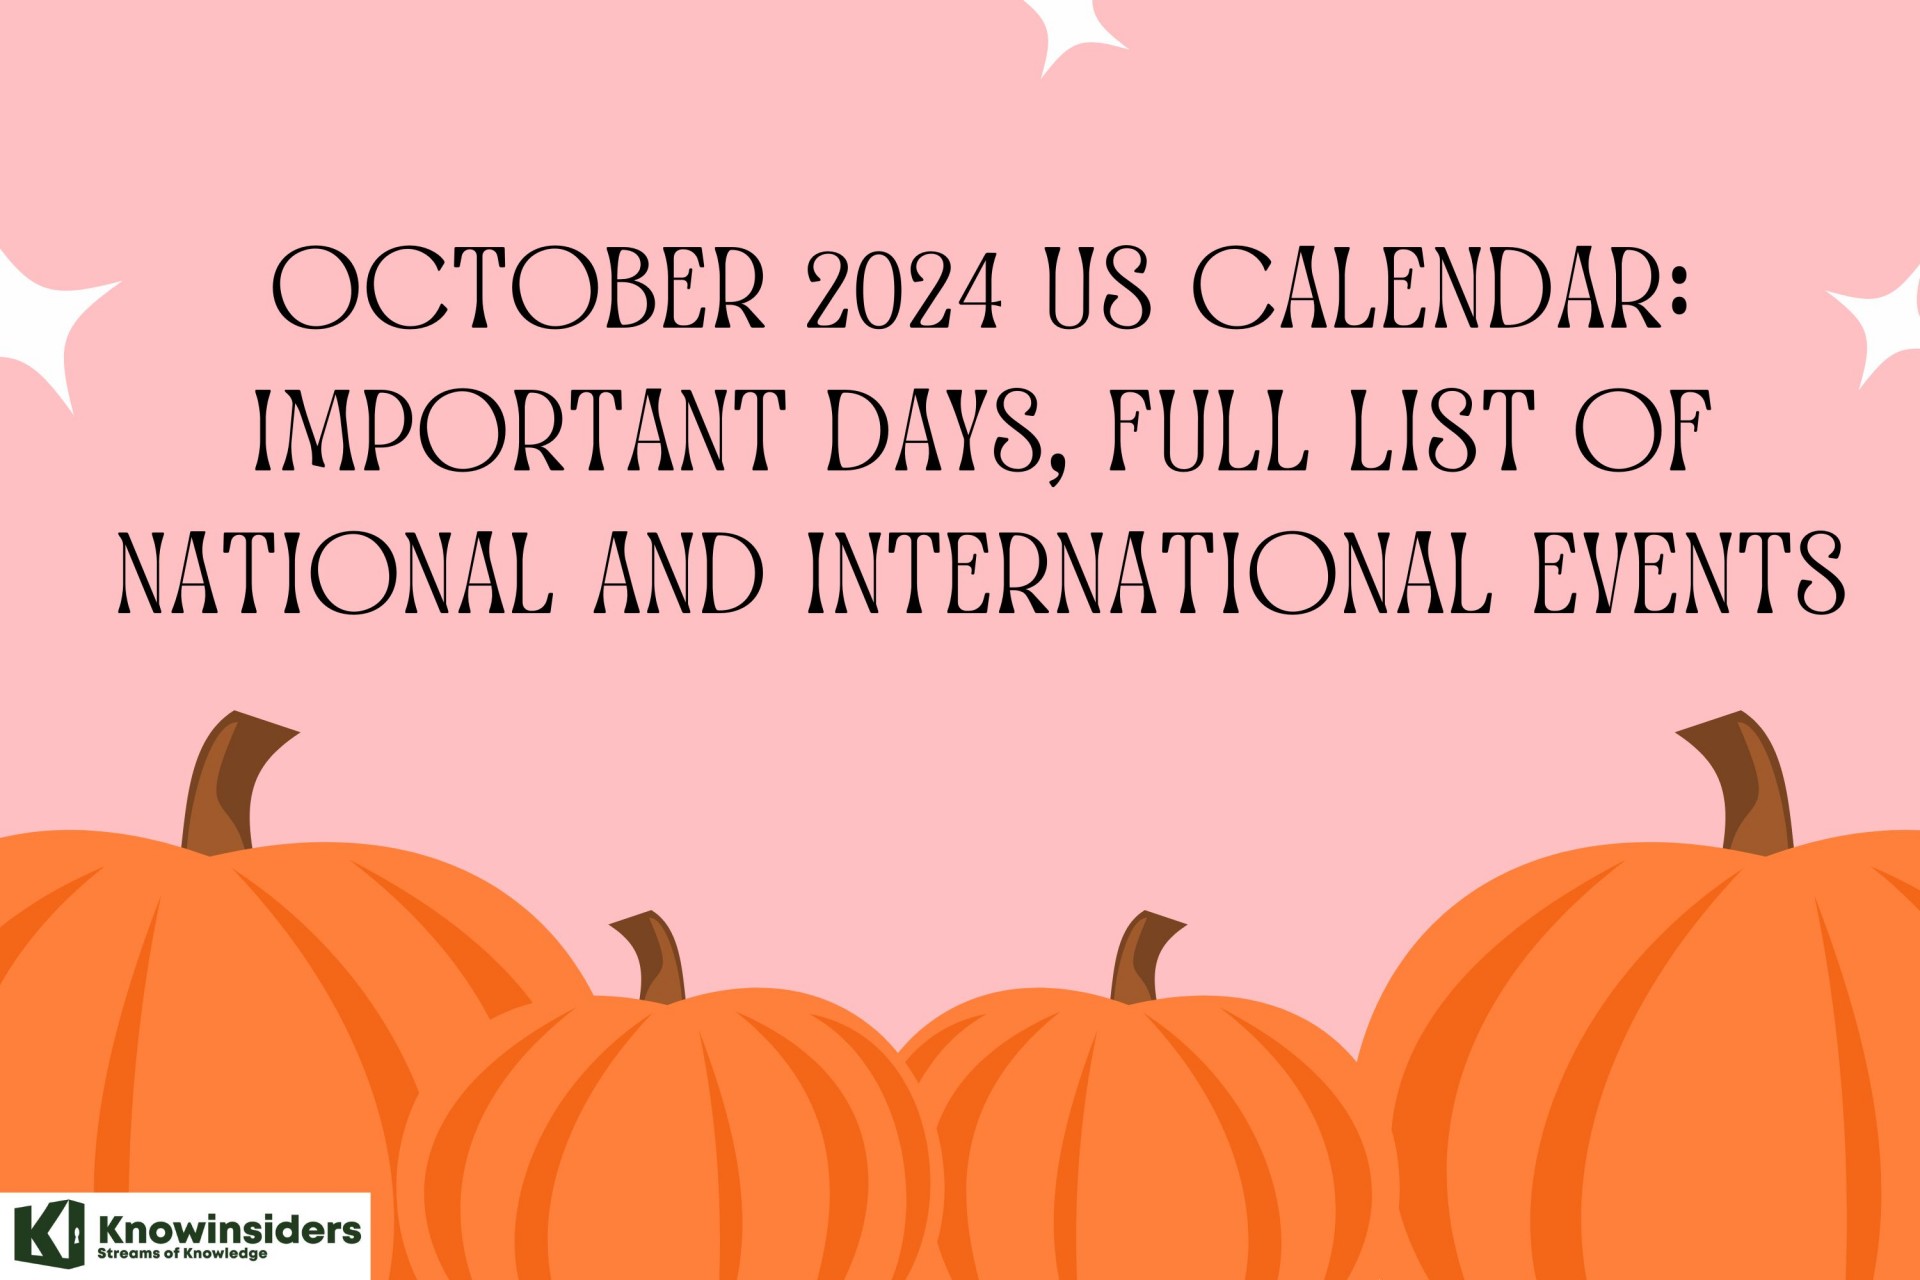 October 2024 US Calendar: Special Days, Full List of National and International Events